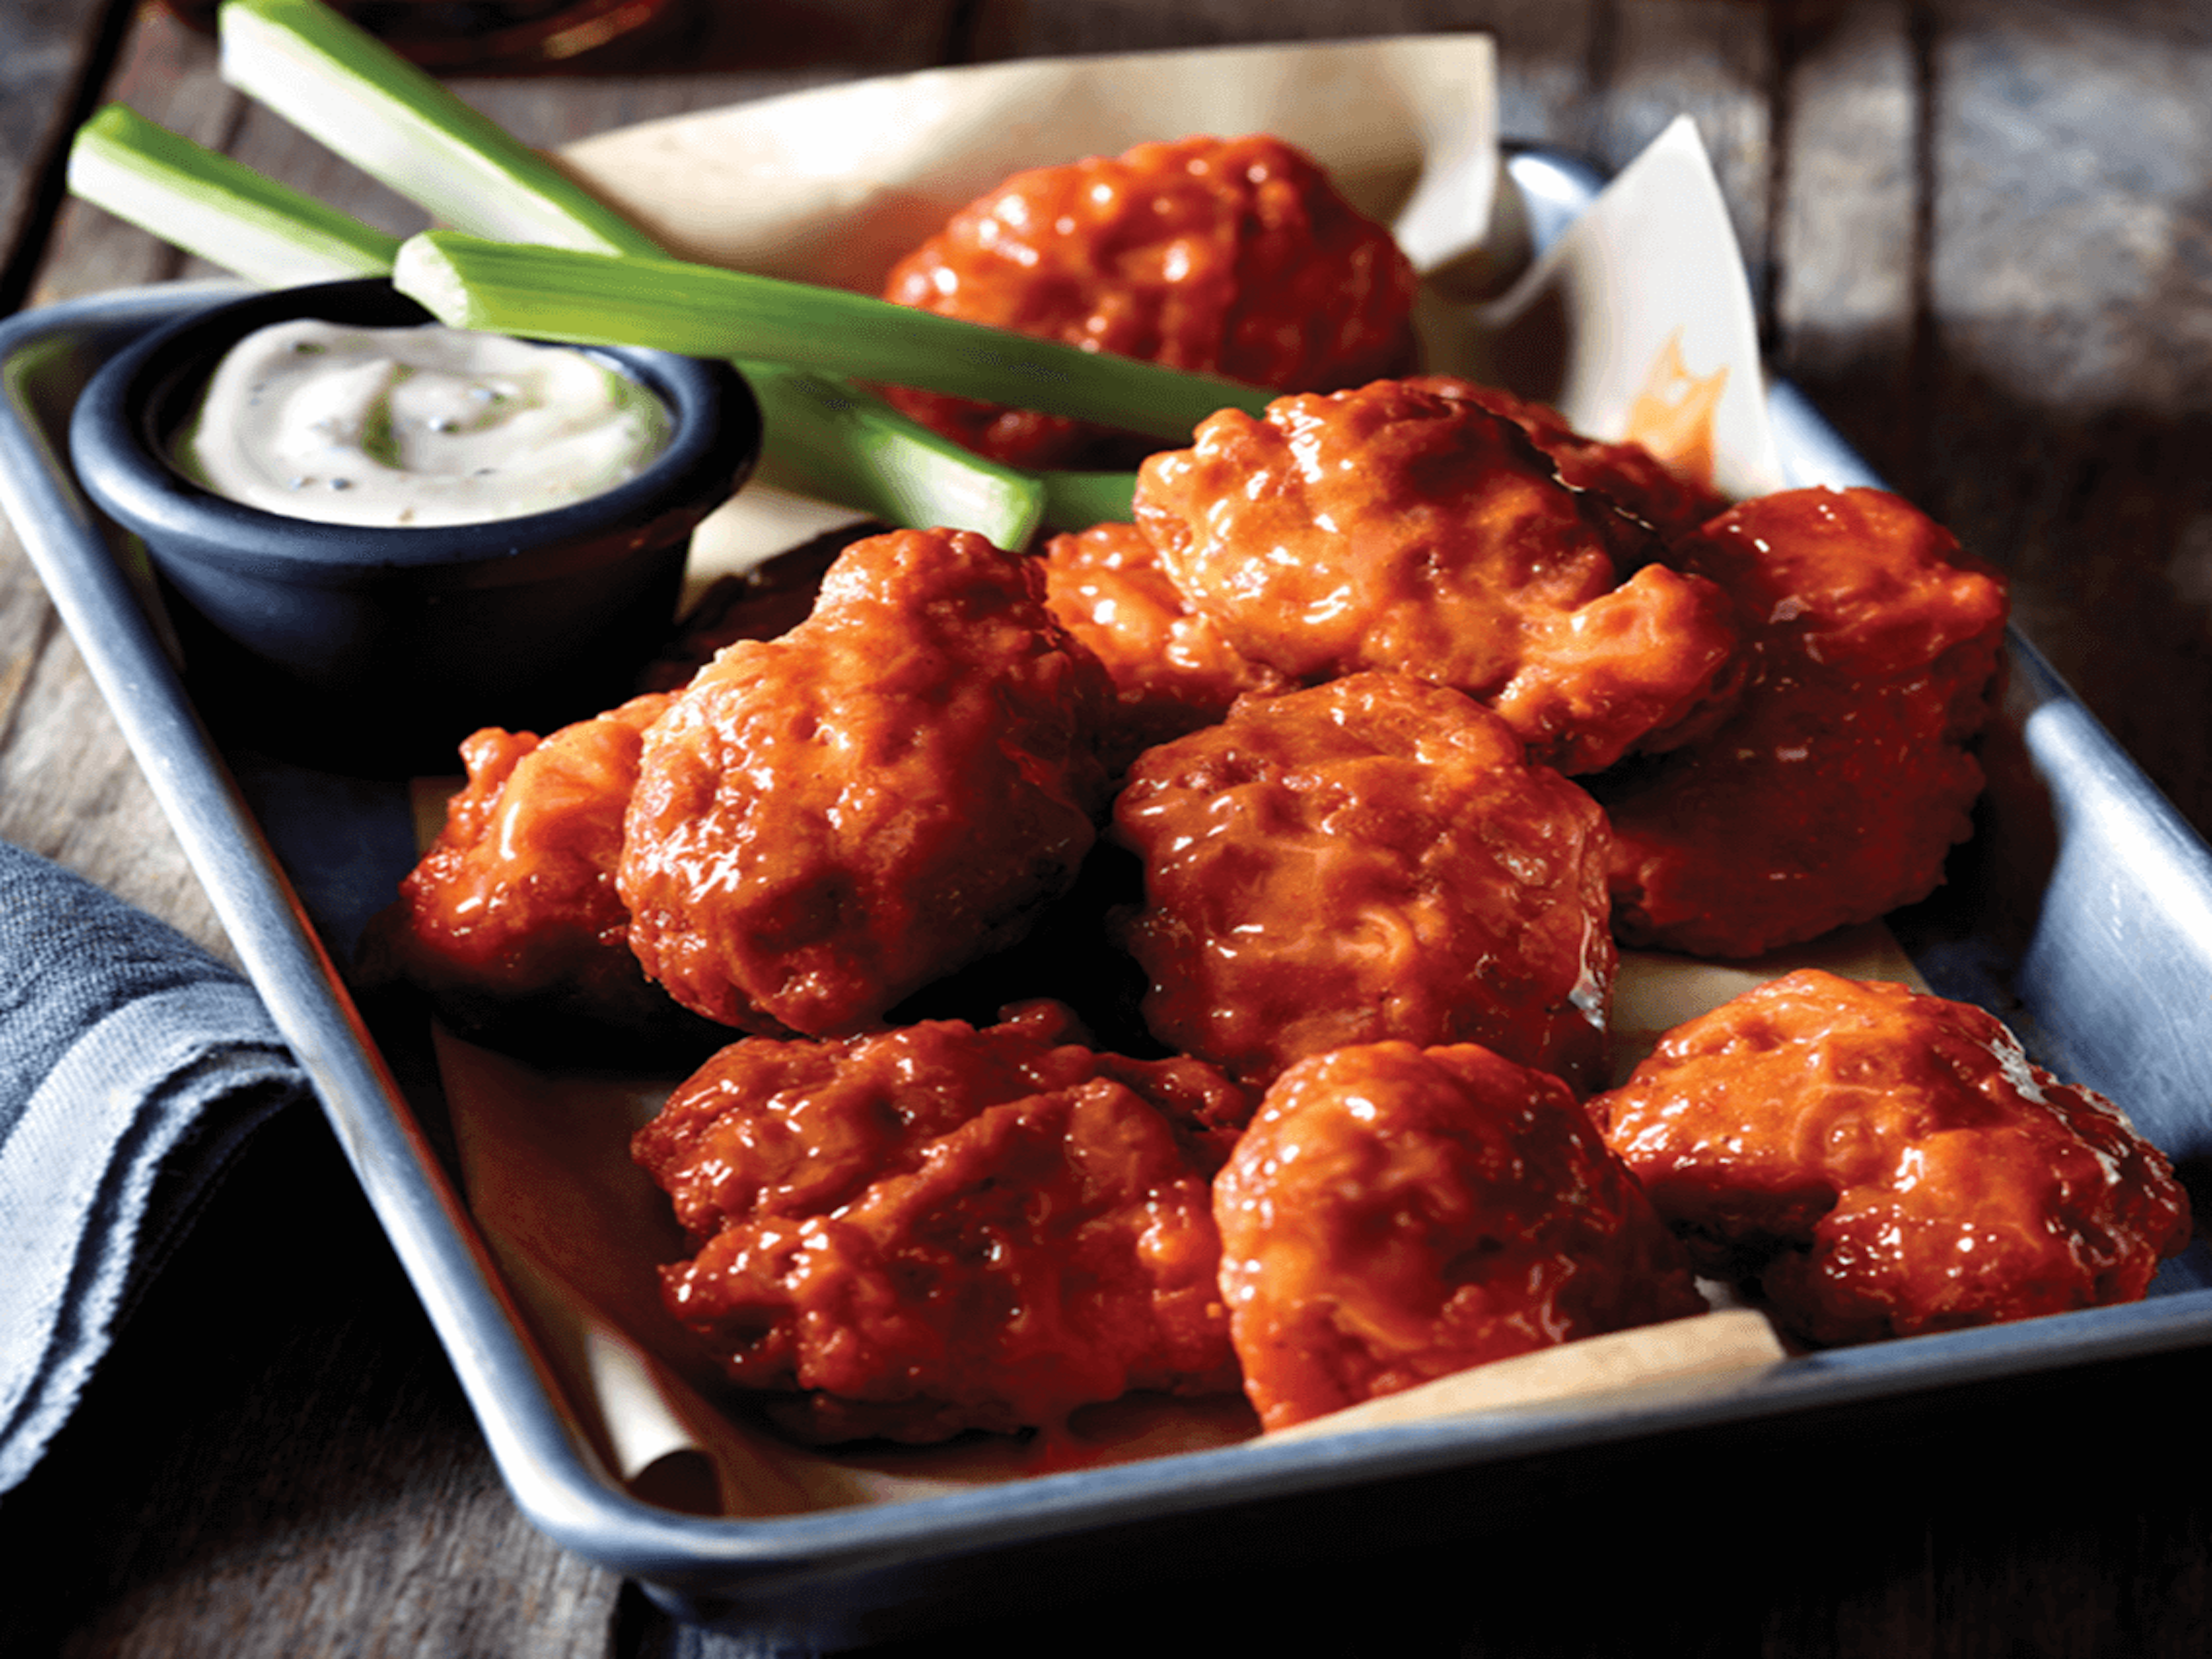 25 Cent Boneless Wings Are Back At